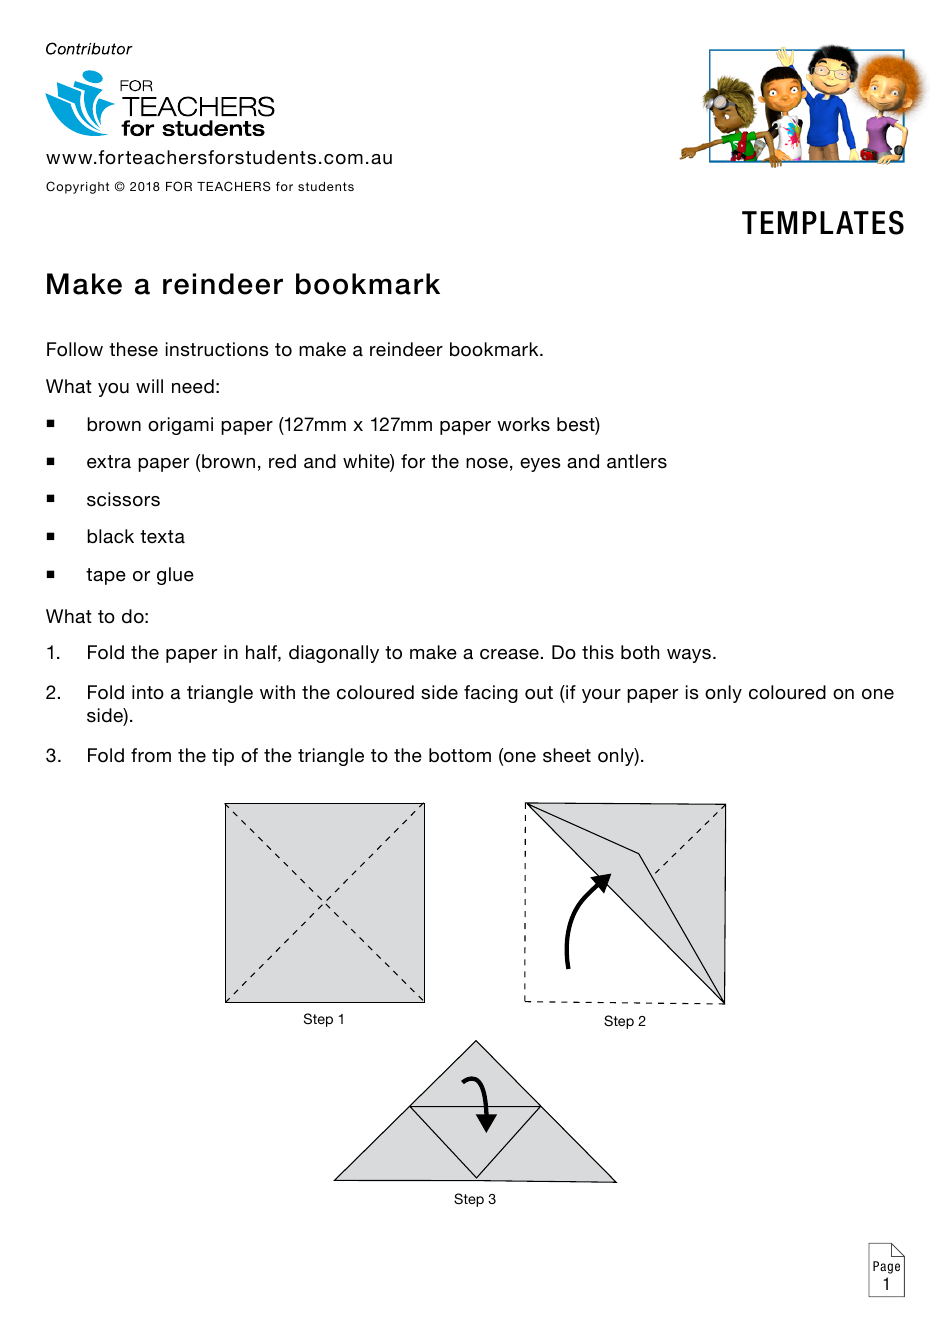 Origami Paper Reindeer Bookmark Templates - Ideal for Teachers and Students